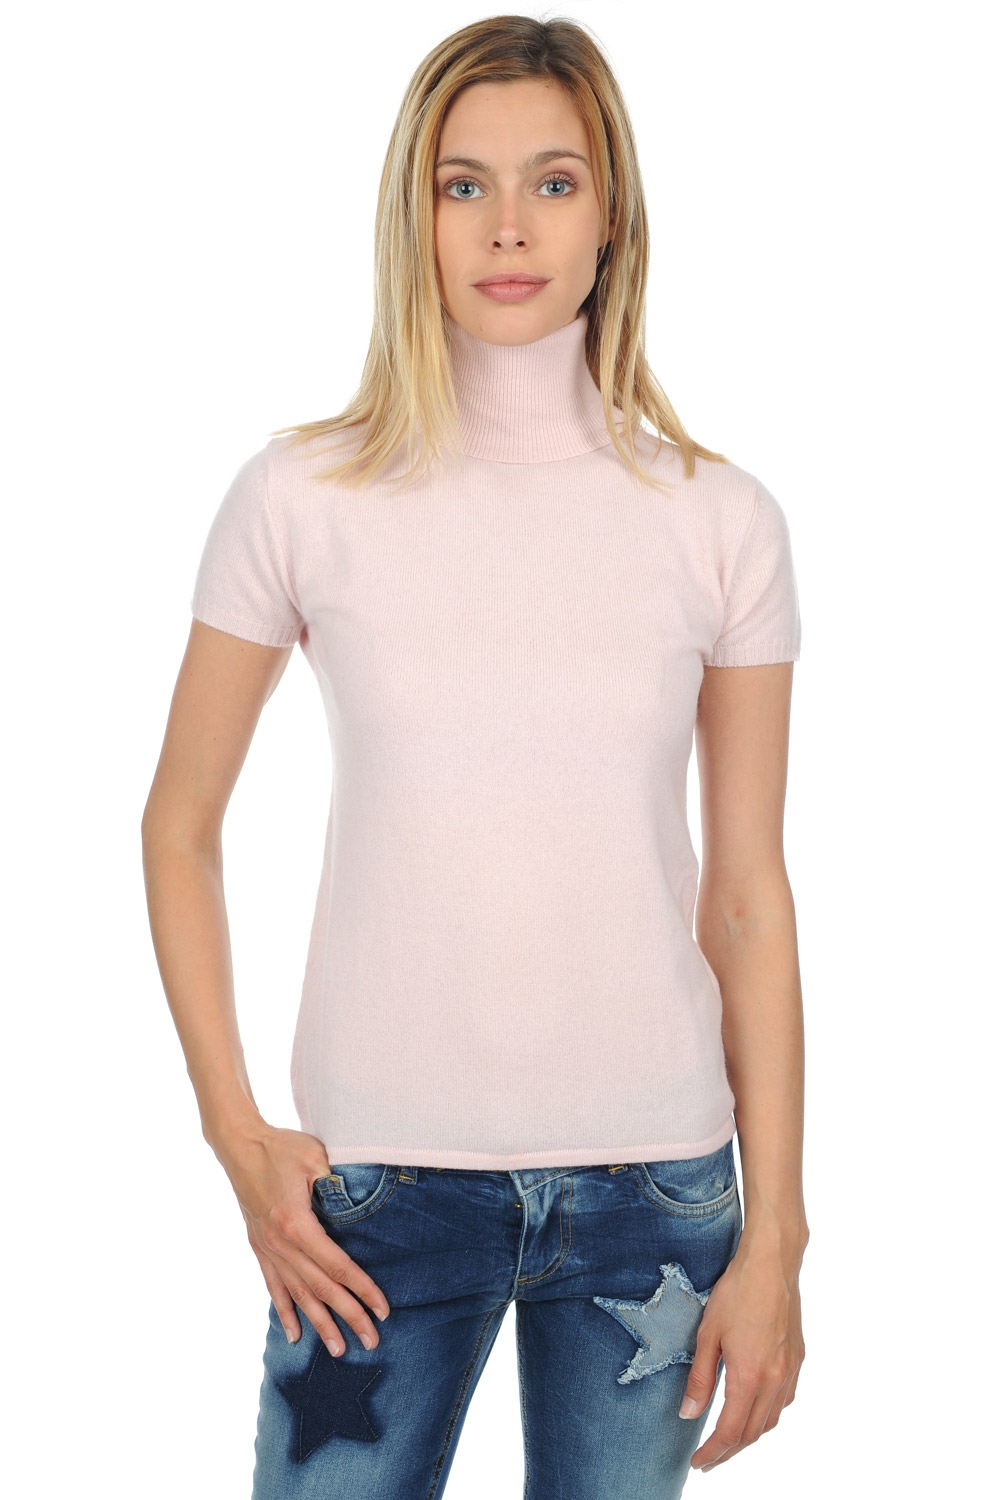 Cachemire pull femme col roule olivia rose pale xl